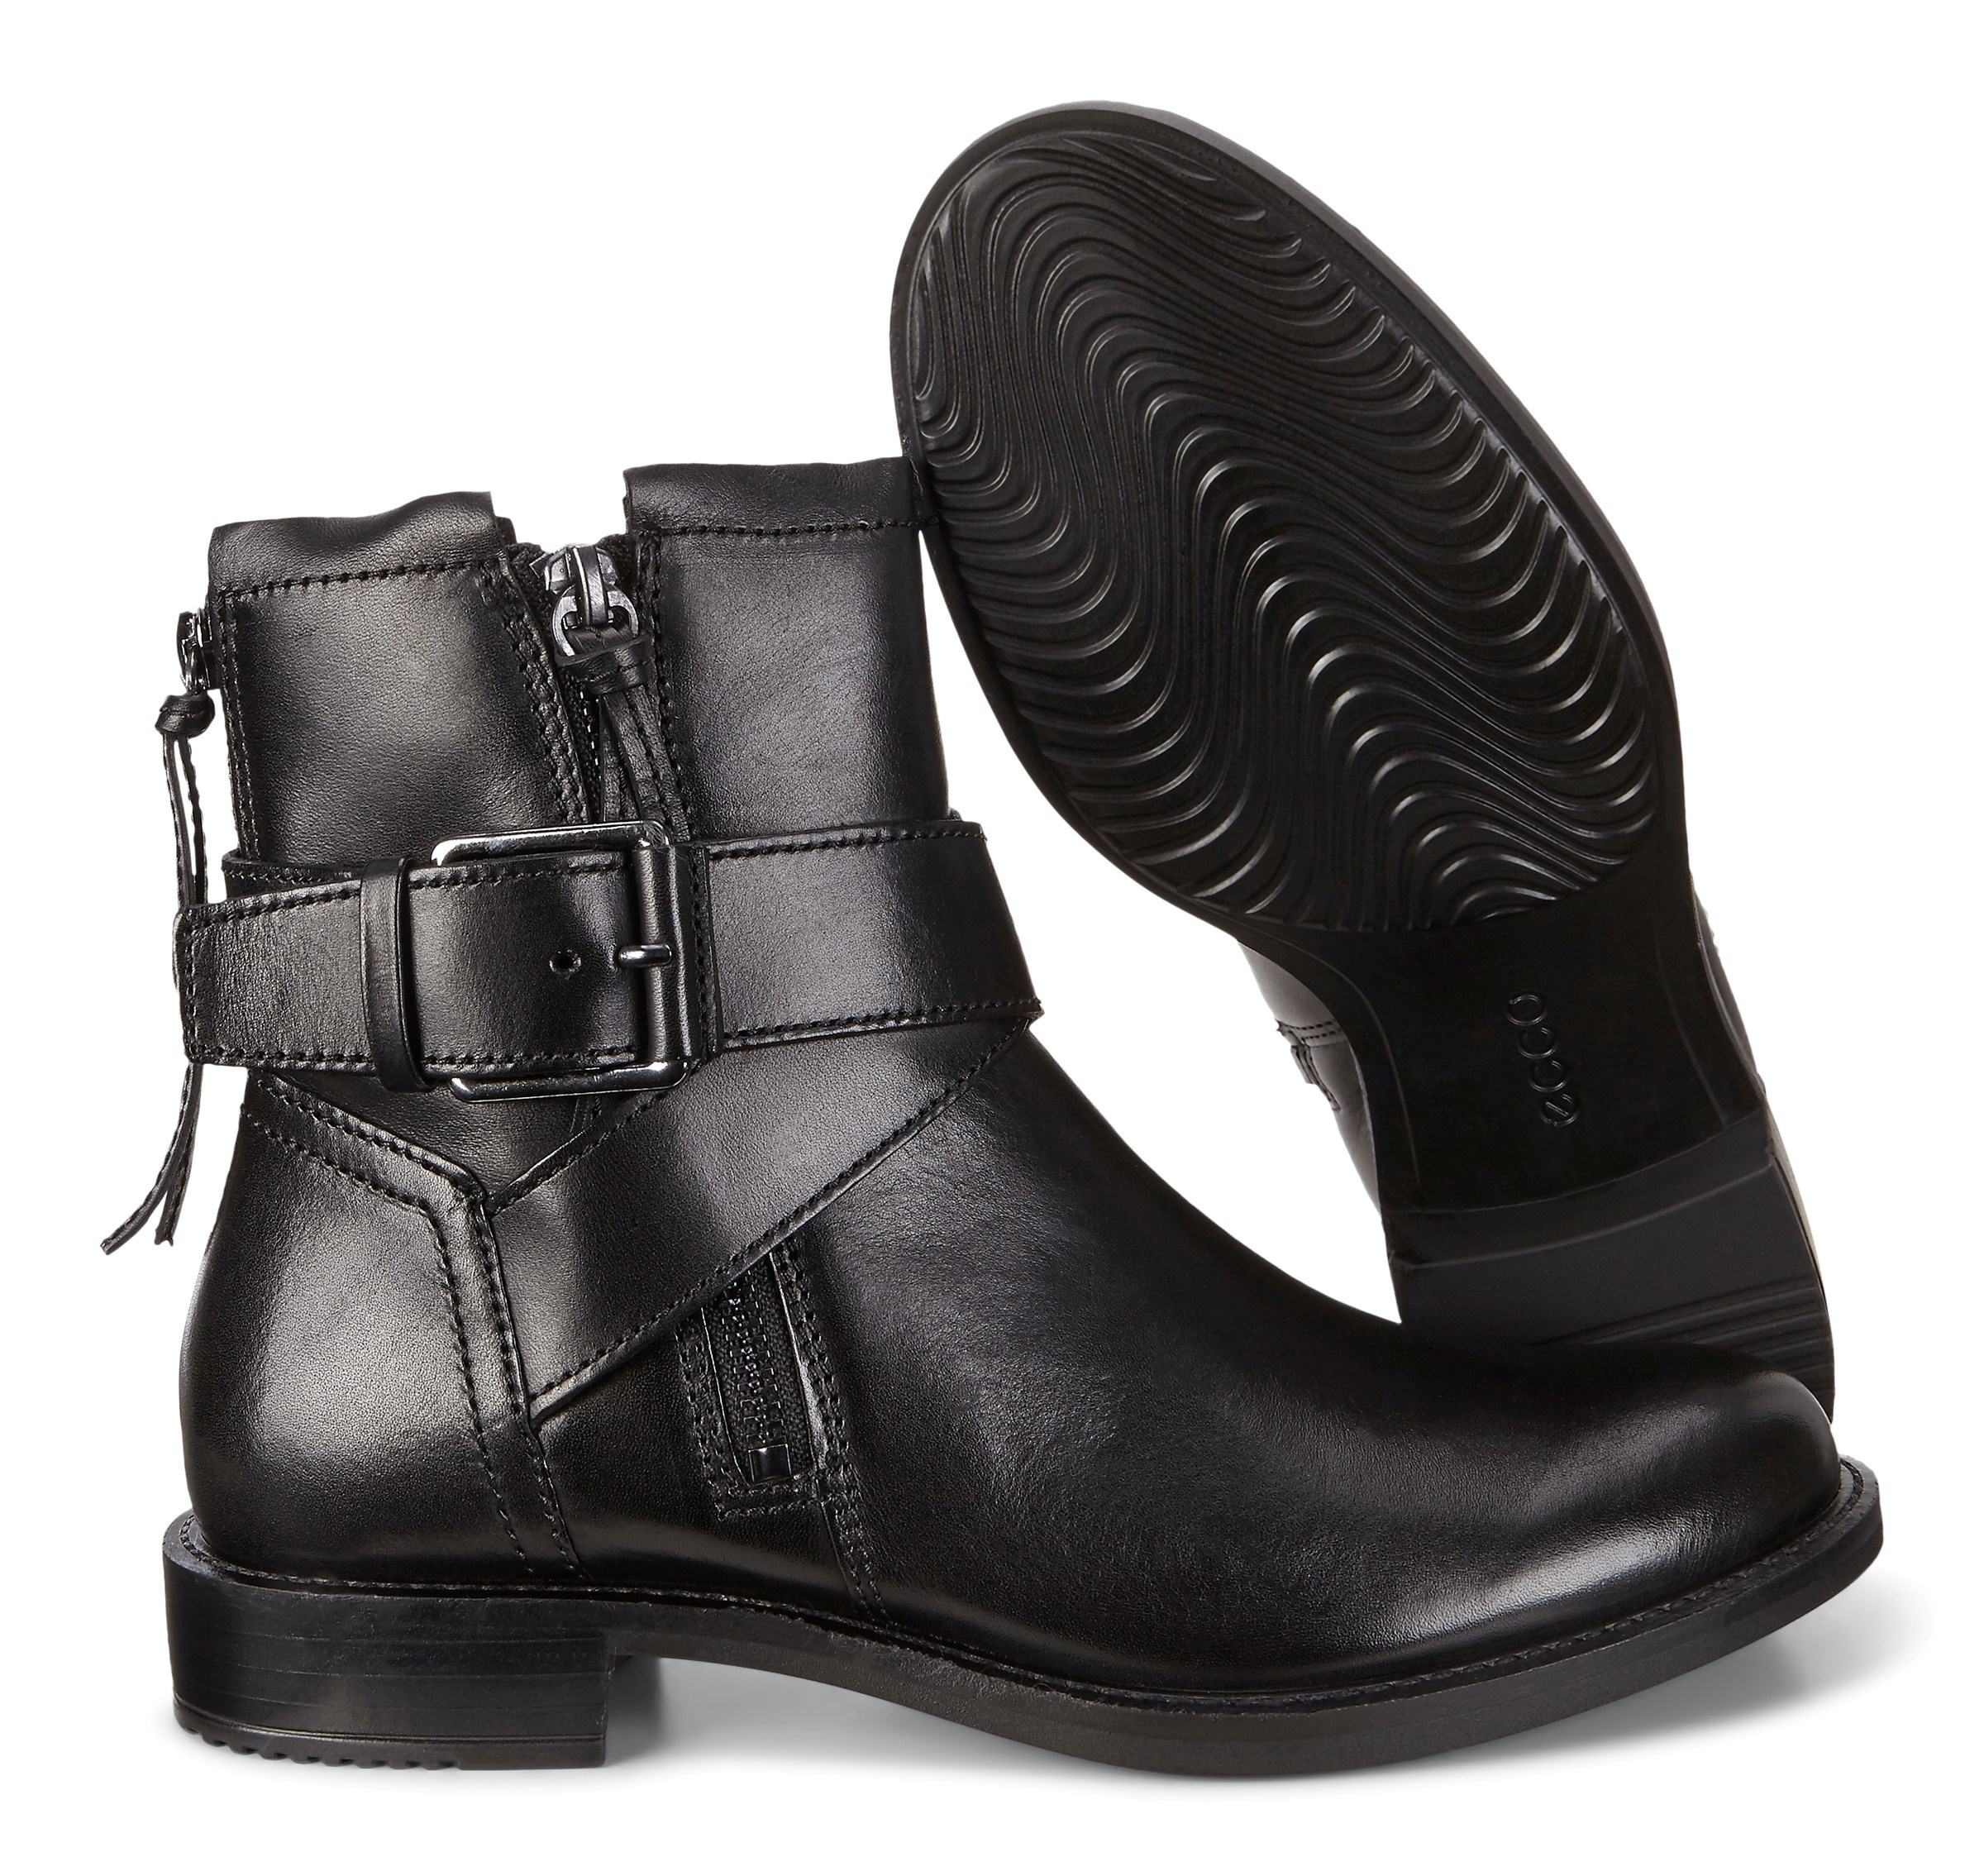 ecco shape 25 ankle boot